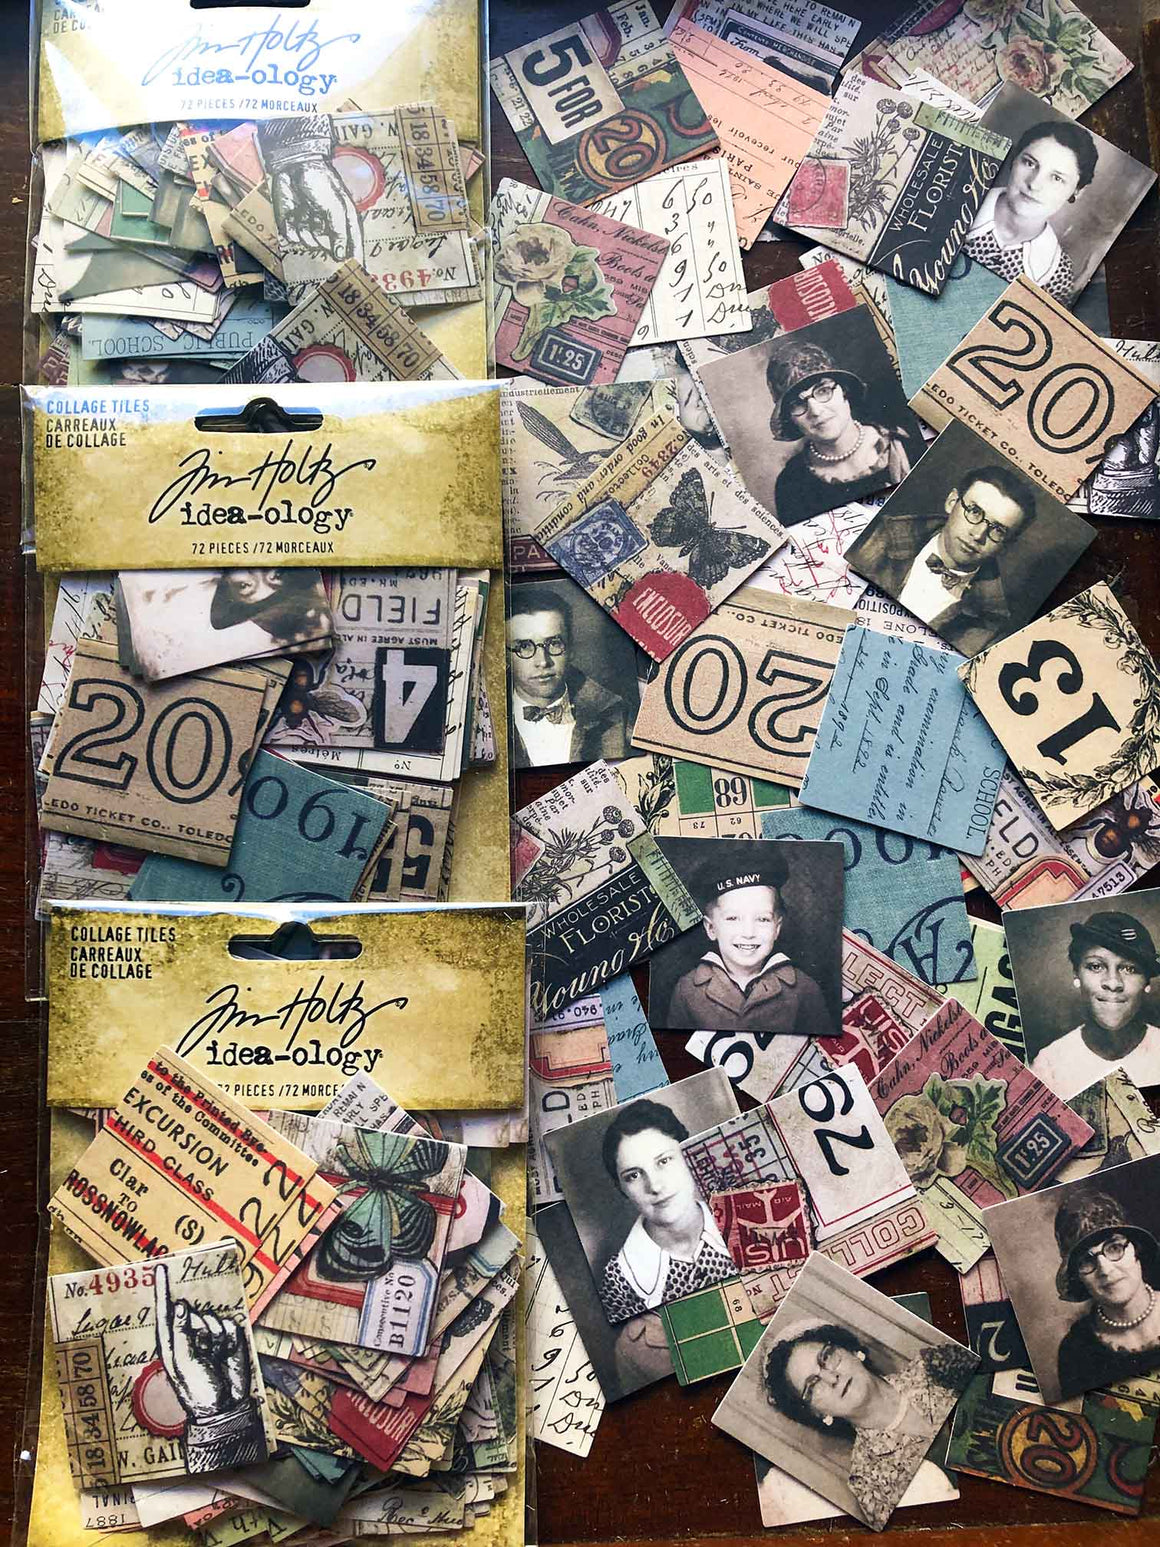 Tim Holtz® New Idea-ology Collage Tiles TH94217 from micmoc.com at Mic Moc